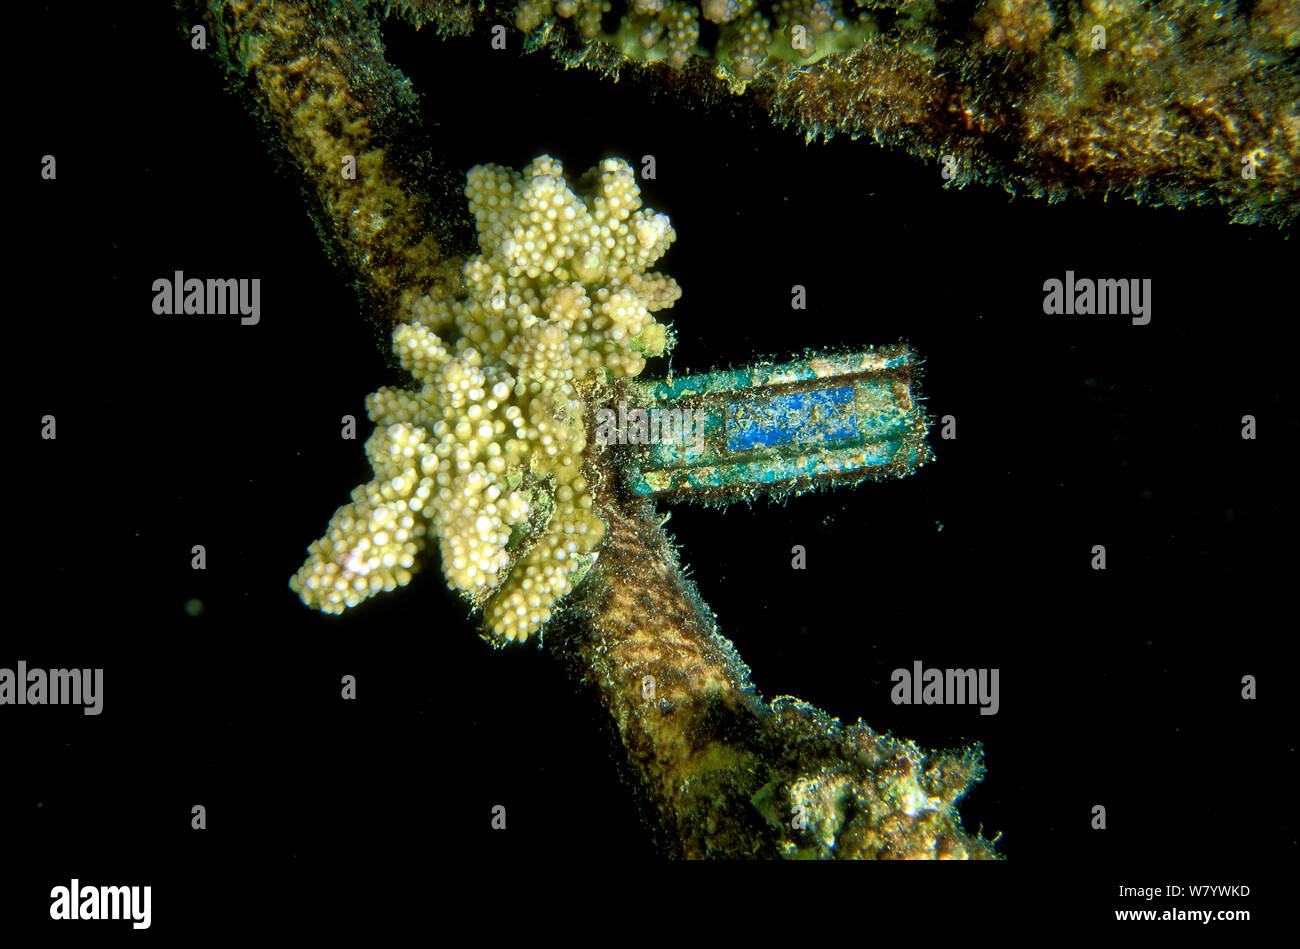 Piece of broken coral tied up to help it regenerate, Vabbinfaru Island, North Male Atoll, Maldives, Indian Ocean. September 2005. Stock Photo